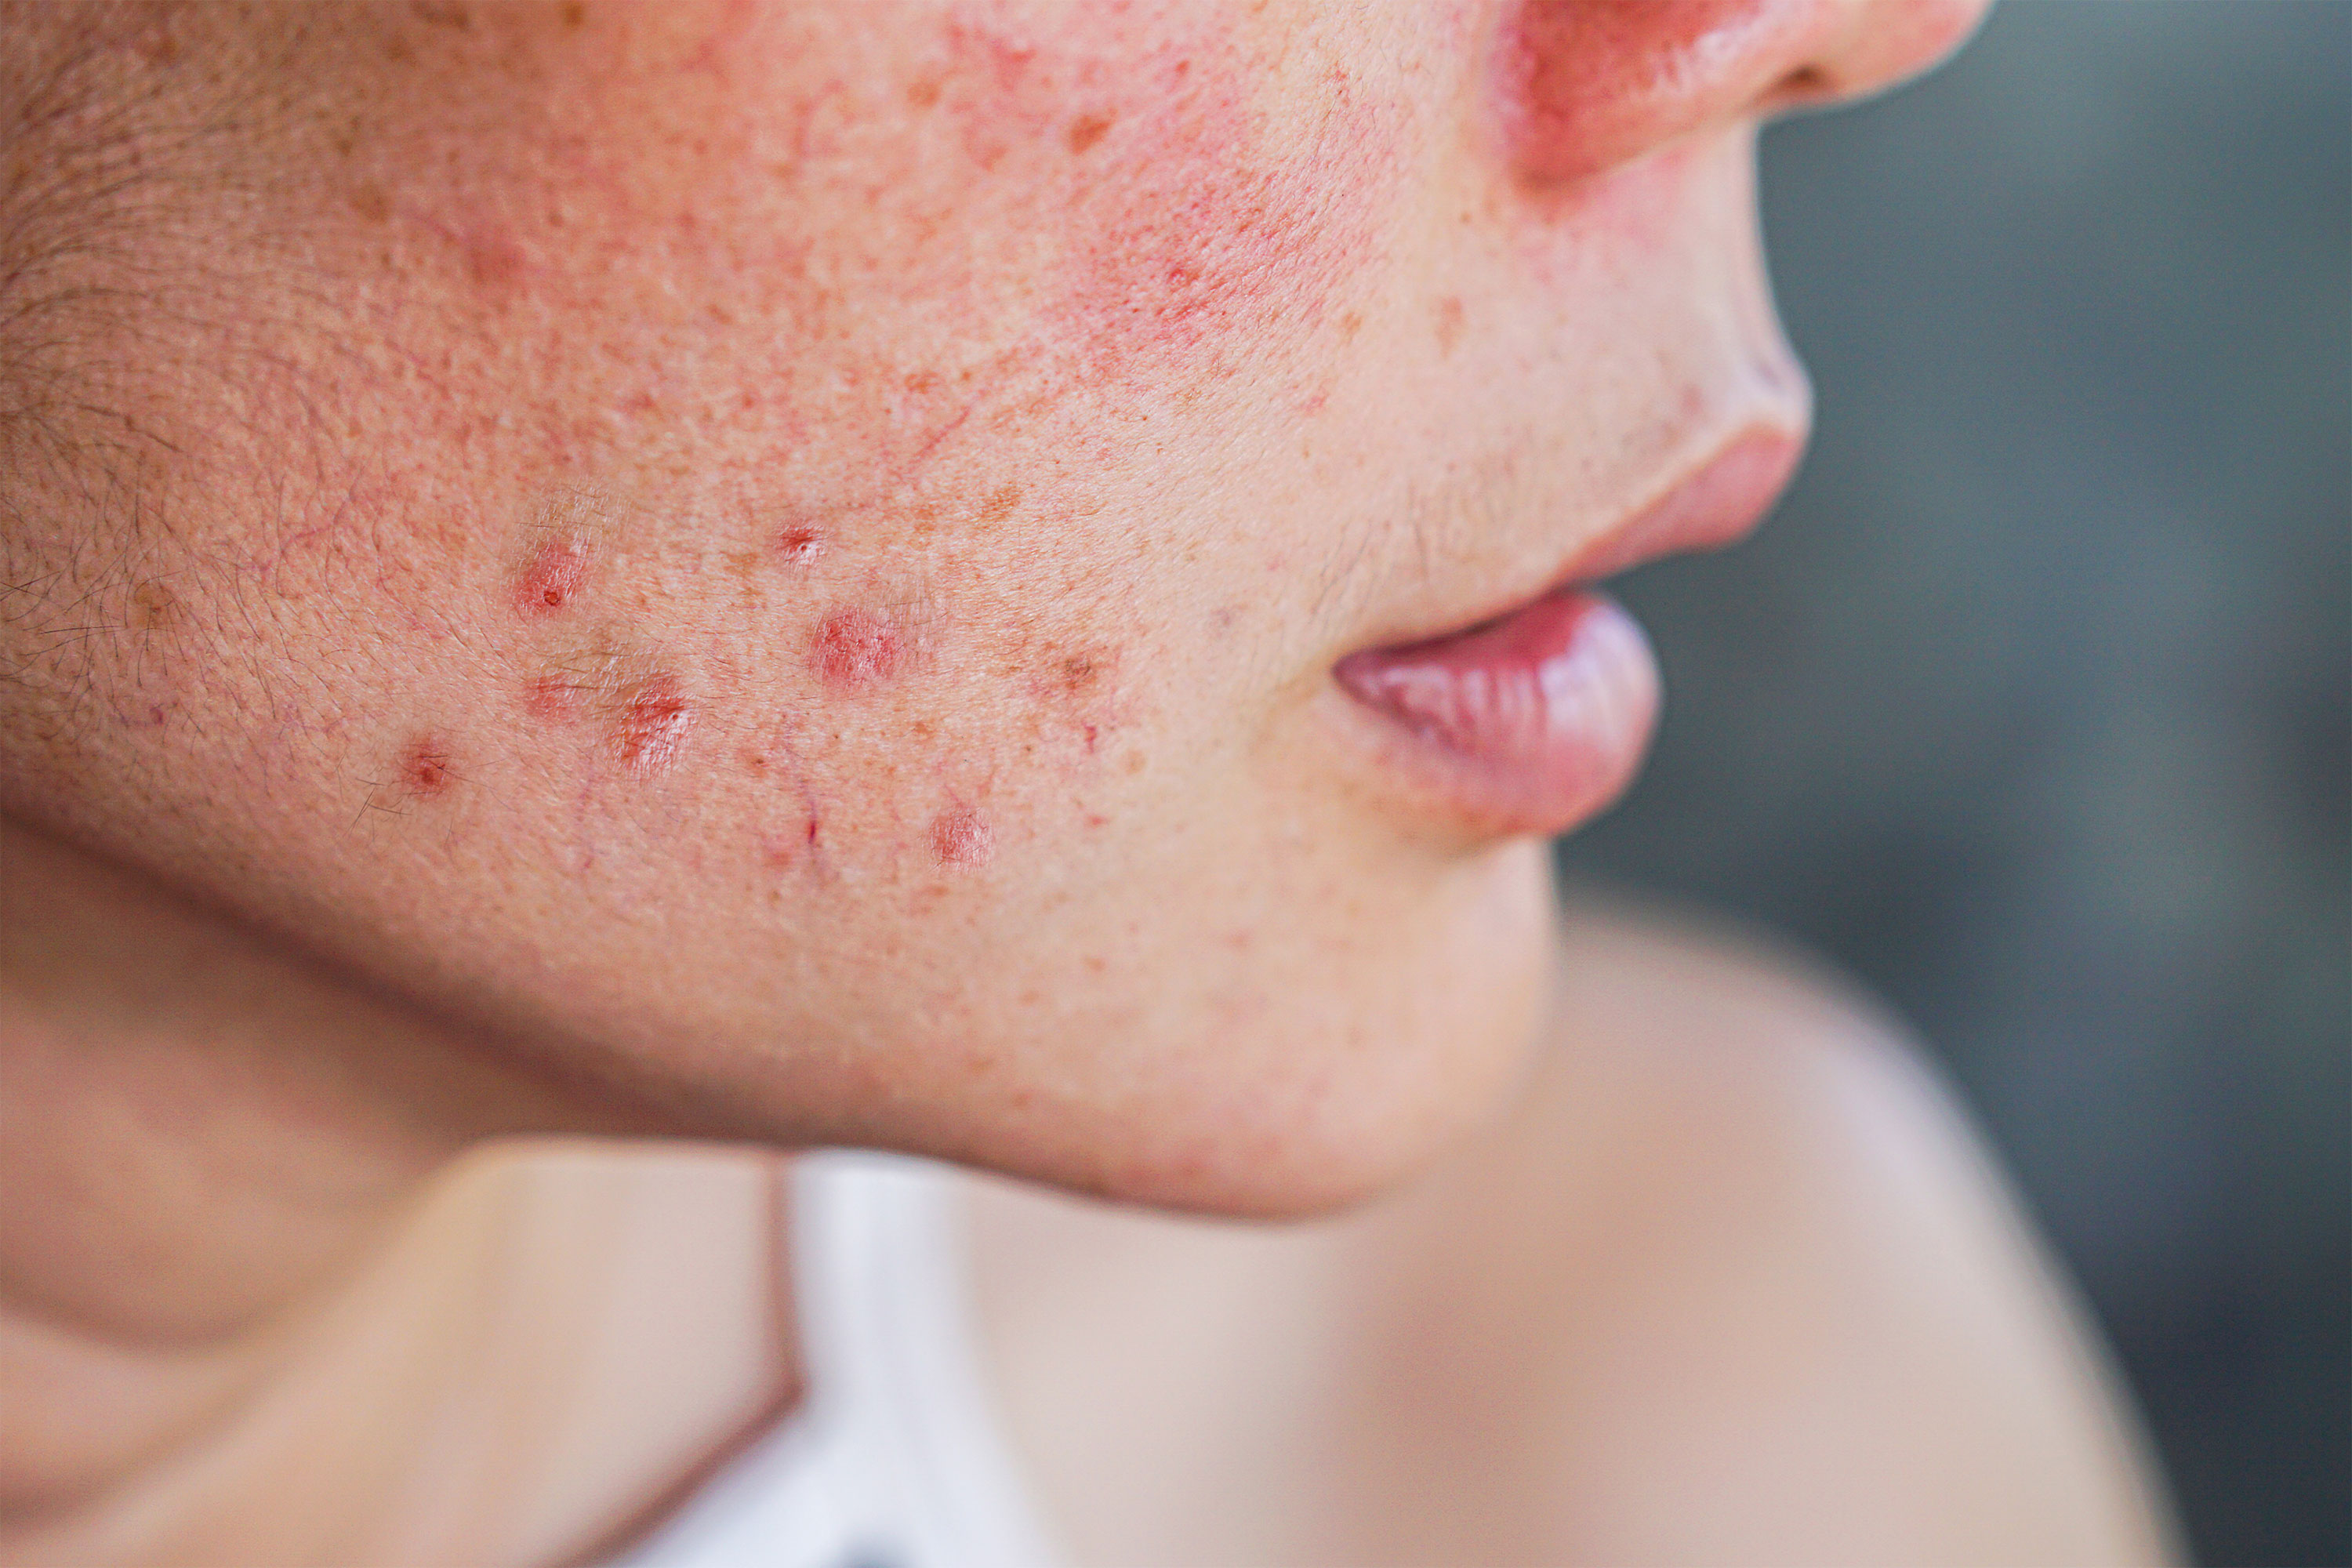 Does Adderall Cause Skin Problems?